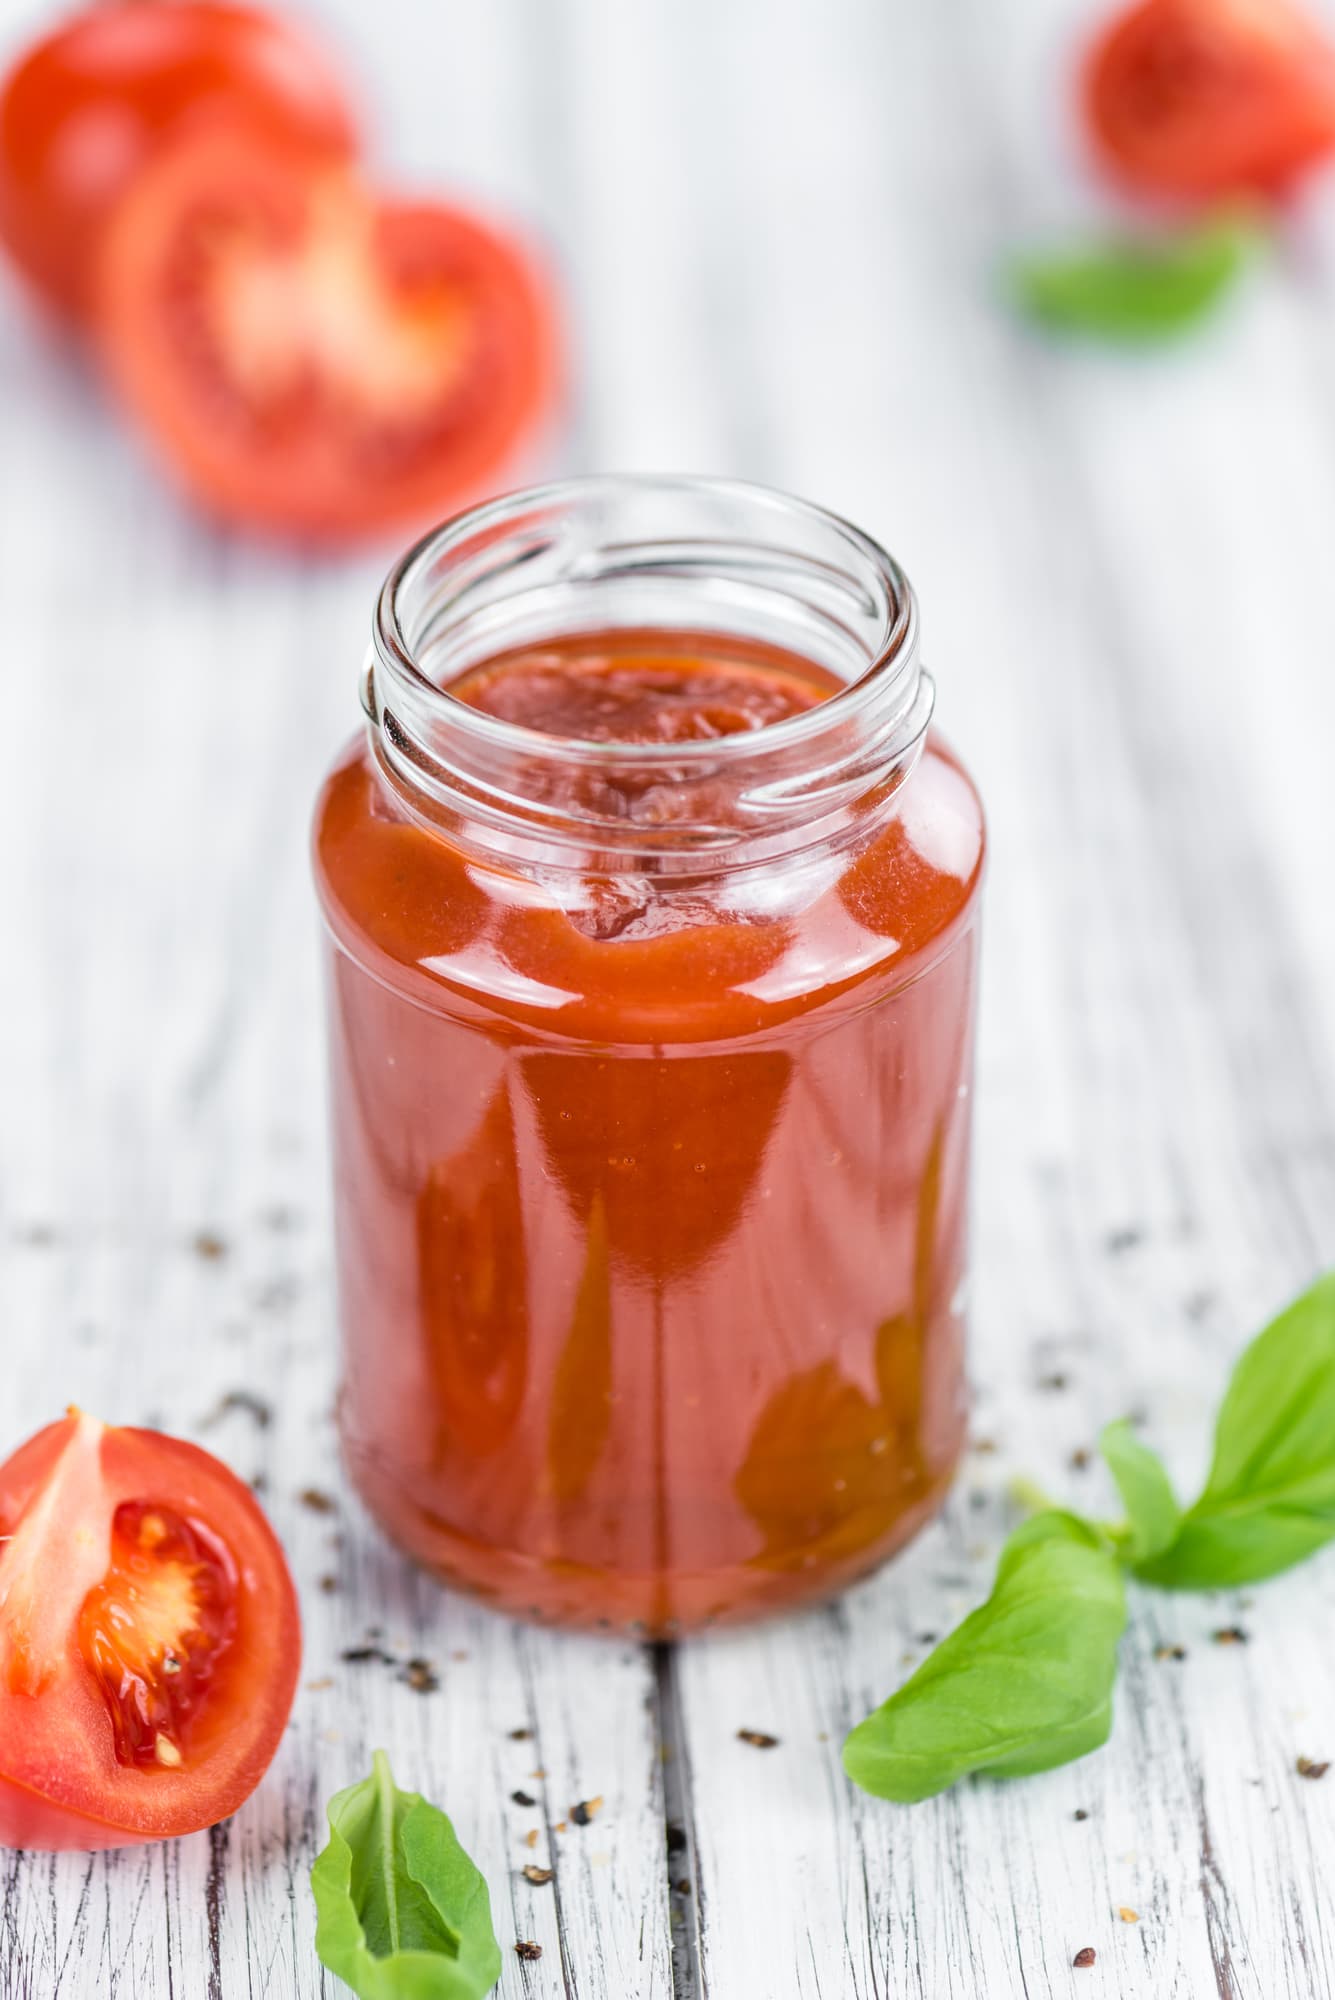 Is Ketchup Keto Friendly? Best Store Options & Recipe